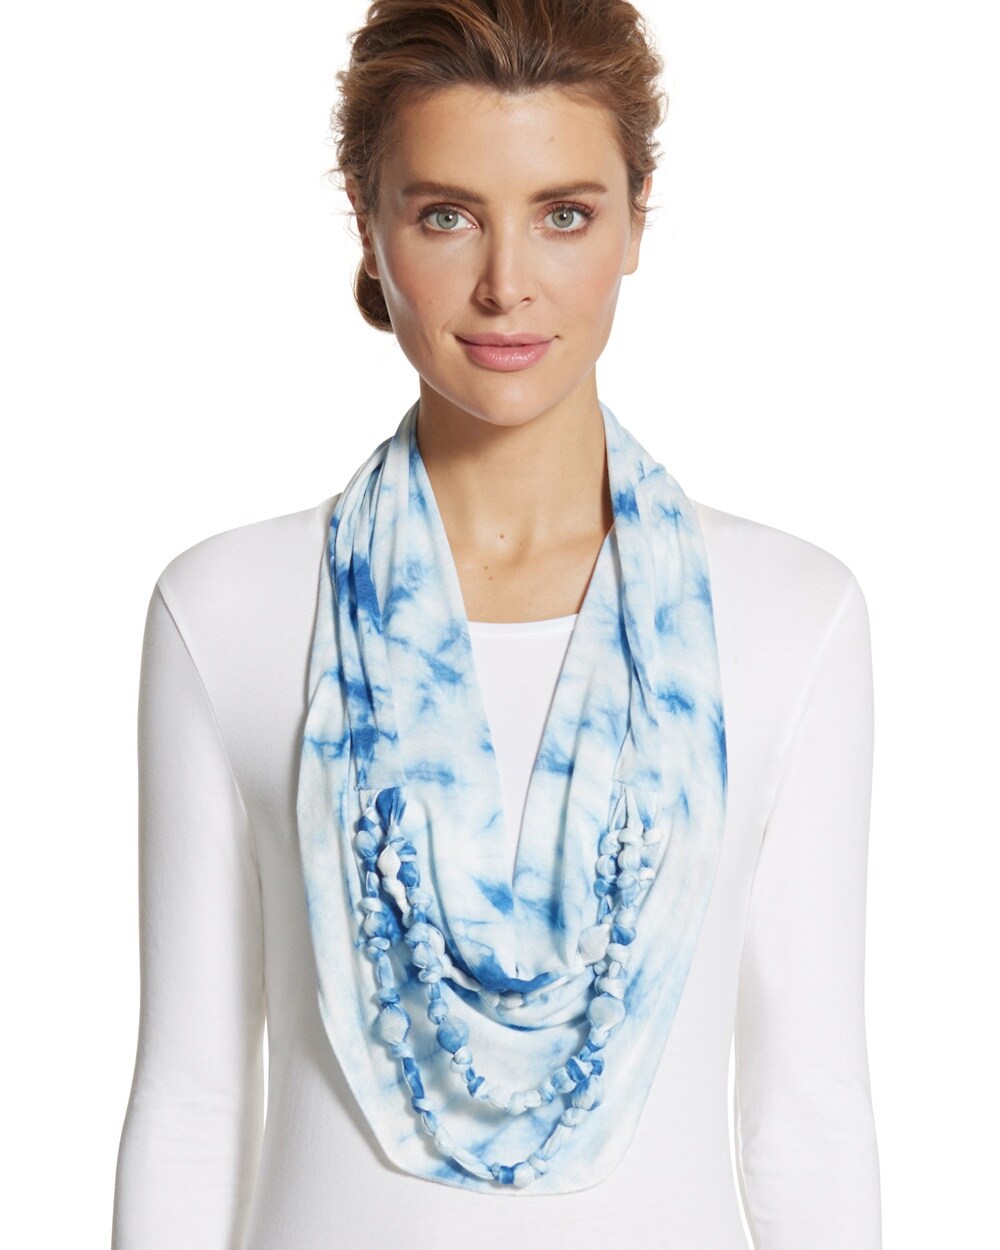 Tara Tie-Dyed Infinity Scarf - Women's New Clothing - Tops, Bottoms ...